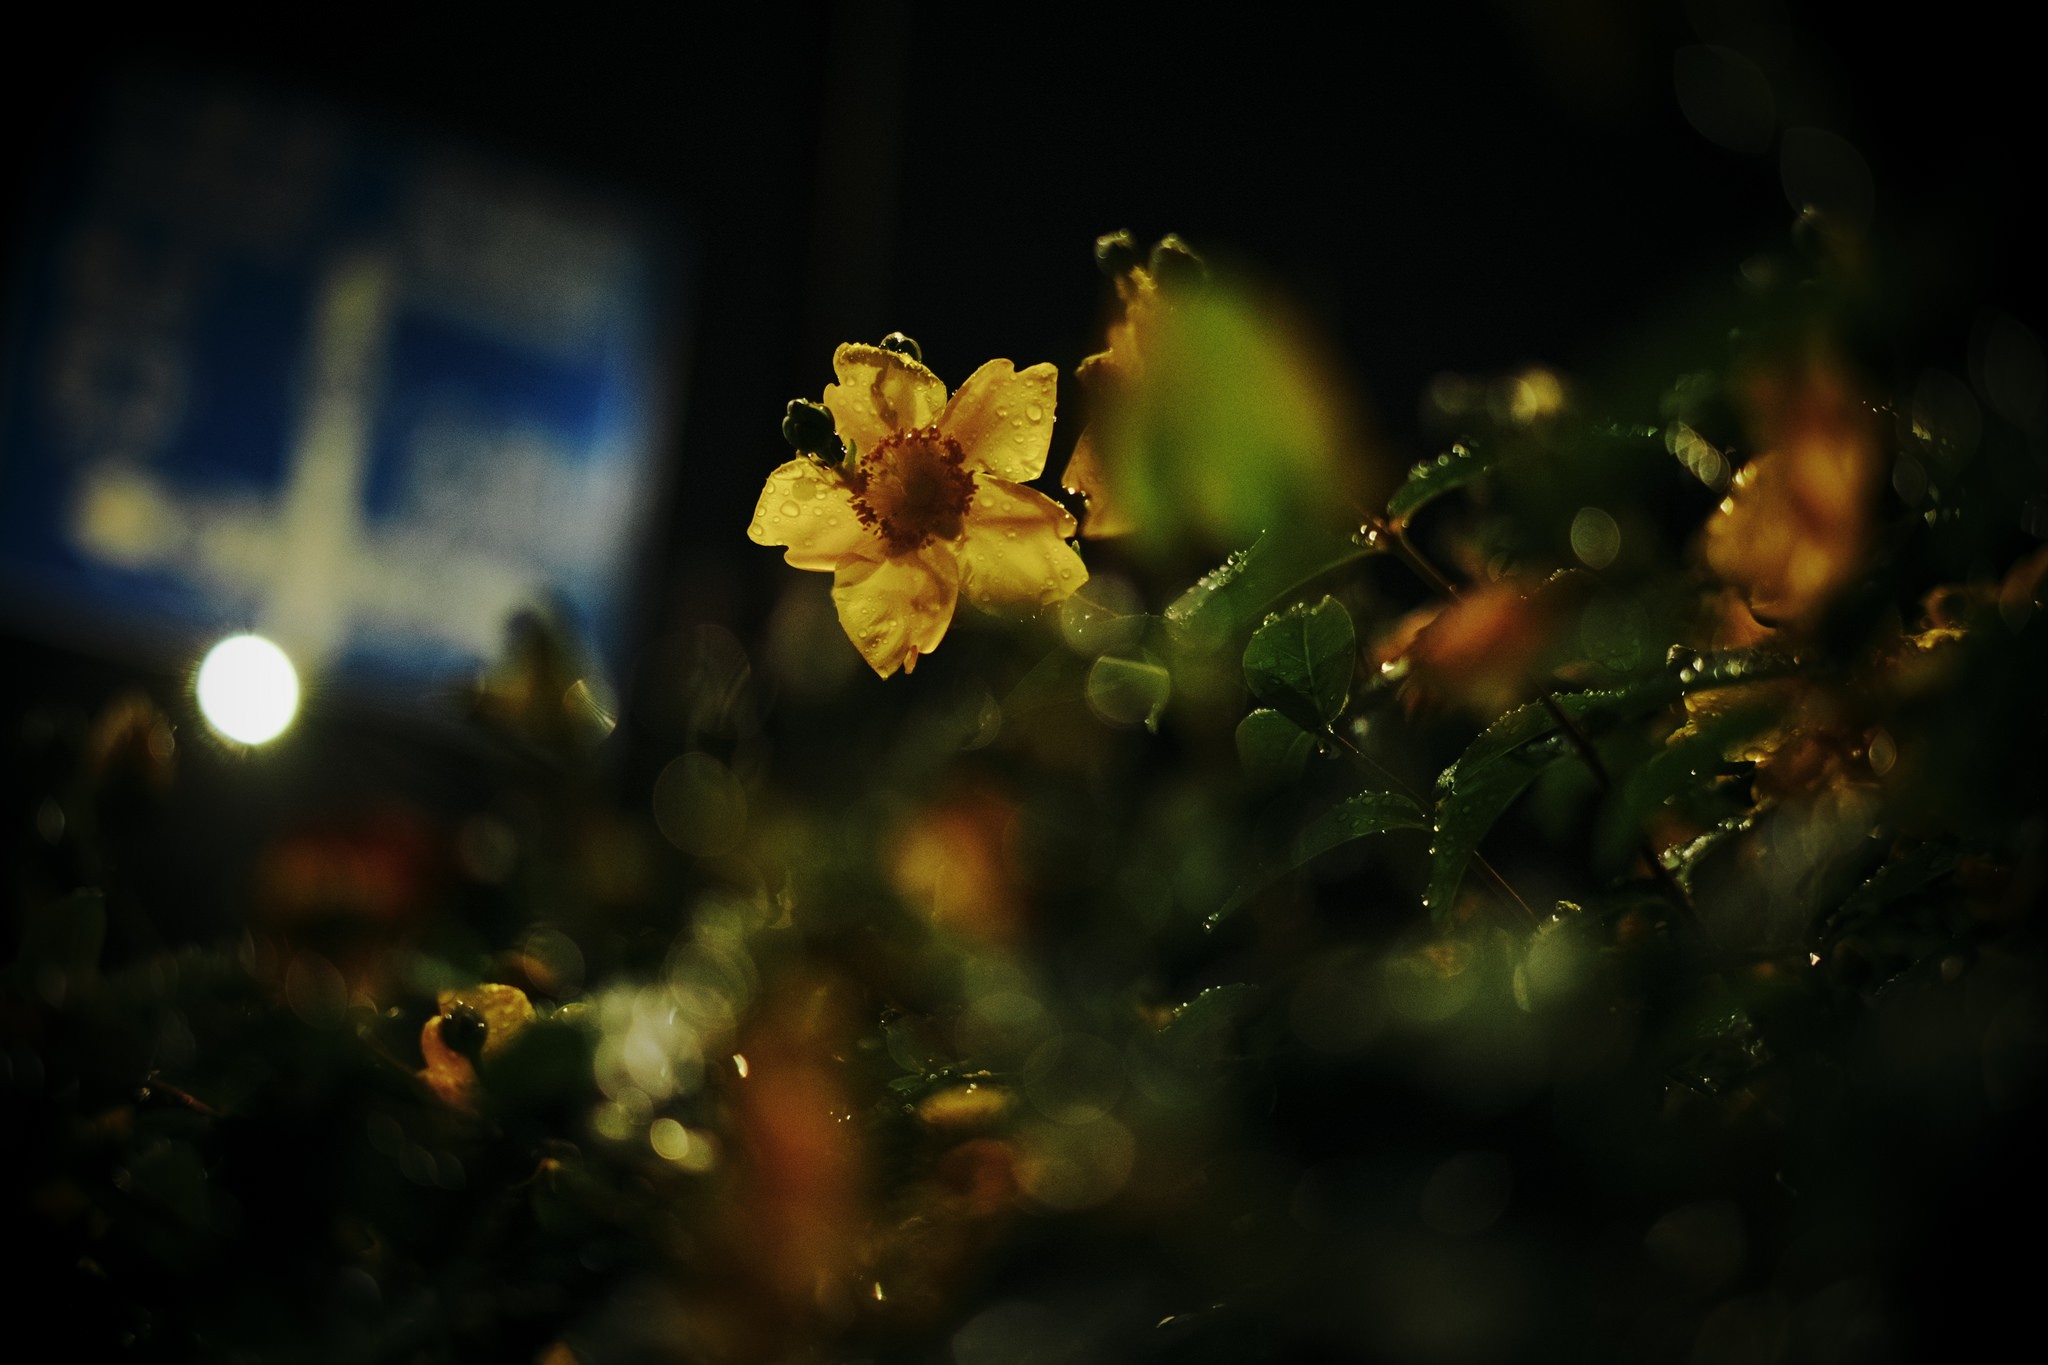 photography, Nature, Macro, Lights, Flowers, Leaves, Plants, Bokeh, Yellow flowers, Water drops Wallpaper